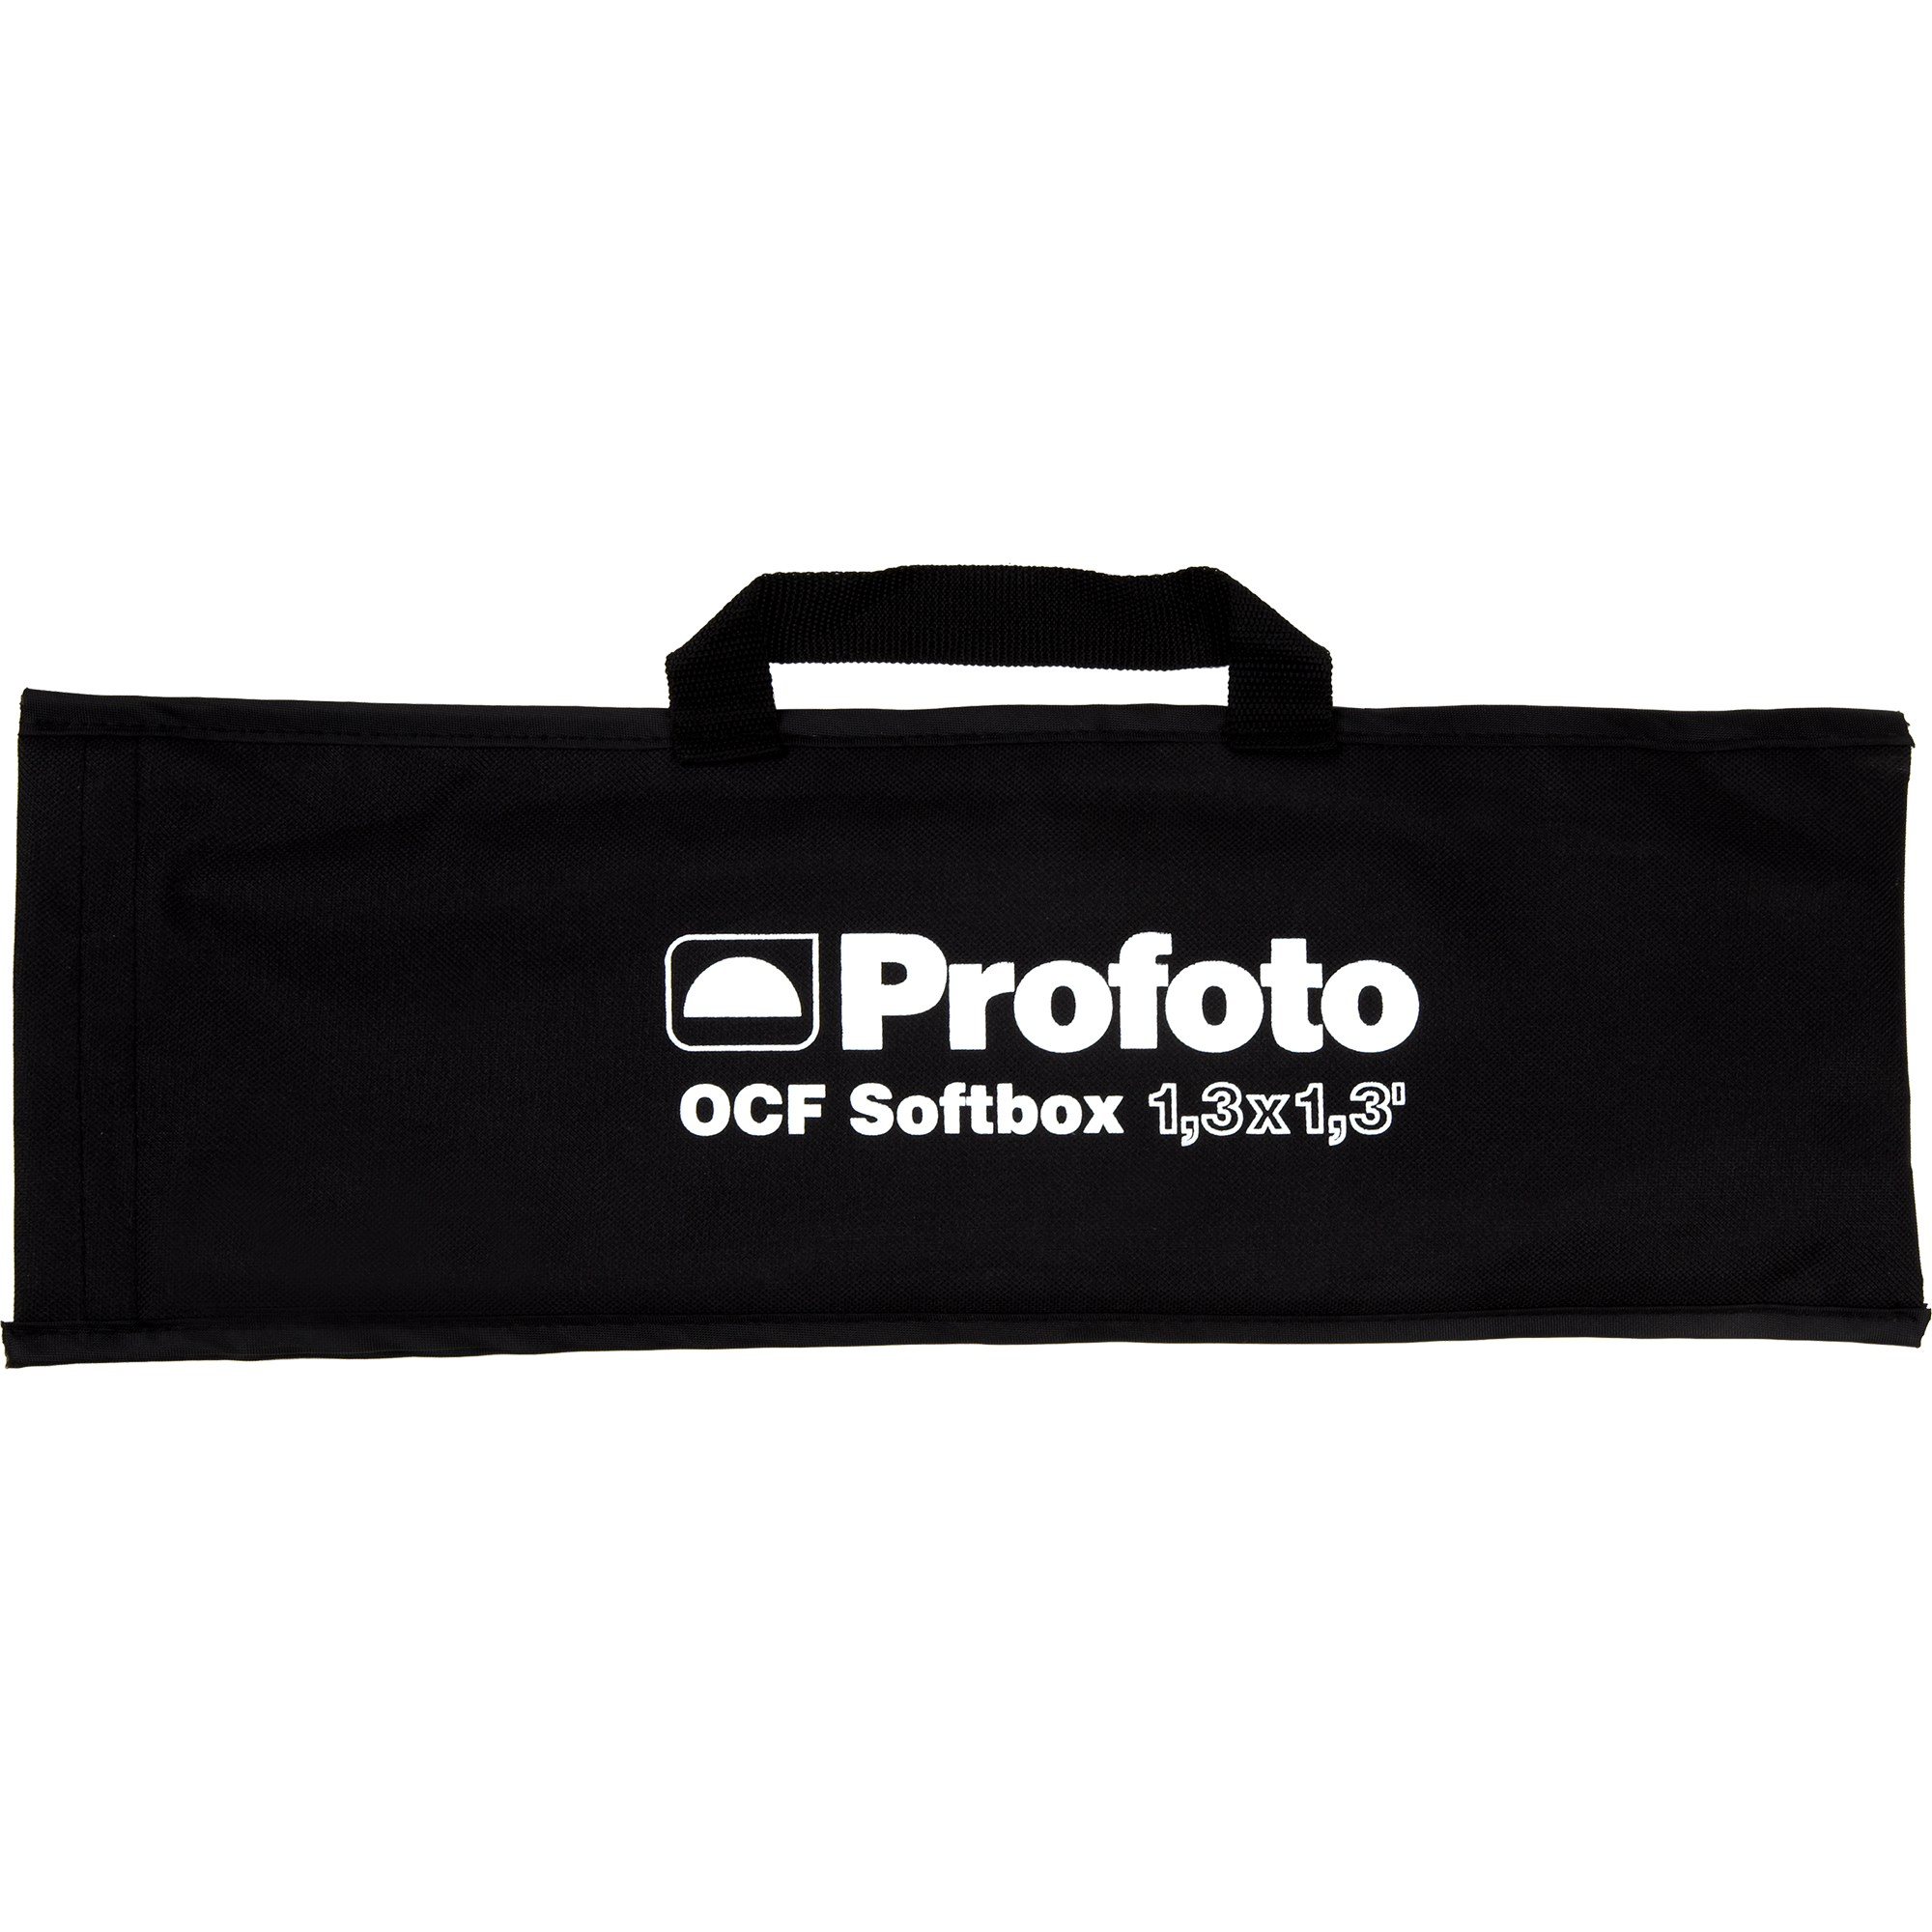 1.3 x 1.3 and More Softgrid Profoto OCF Softbox with Correction Gel Pack